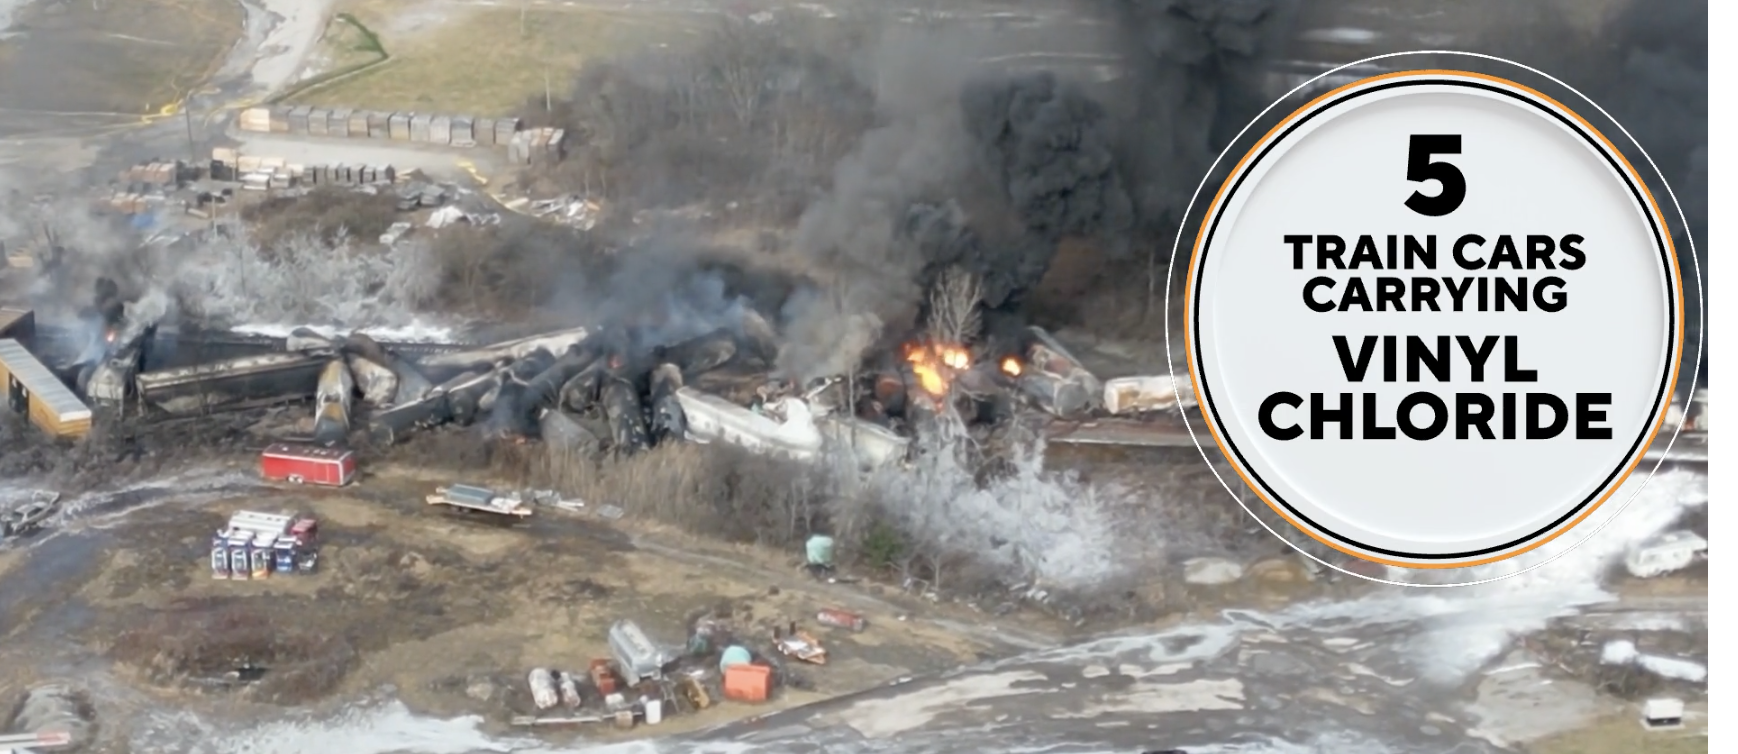 The East Palestine train derailment showed how chemical transport is not adequately tested by the EPA.